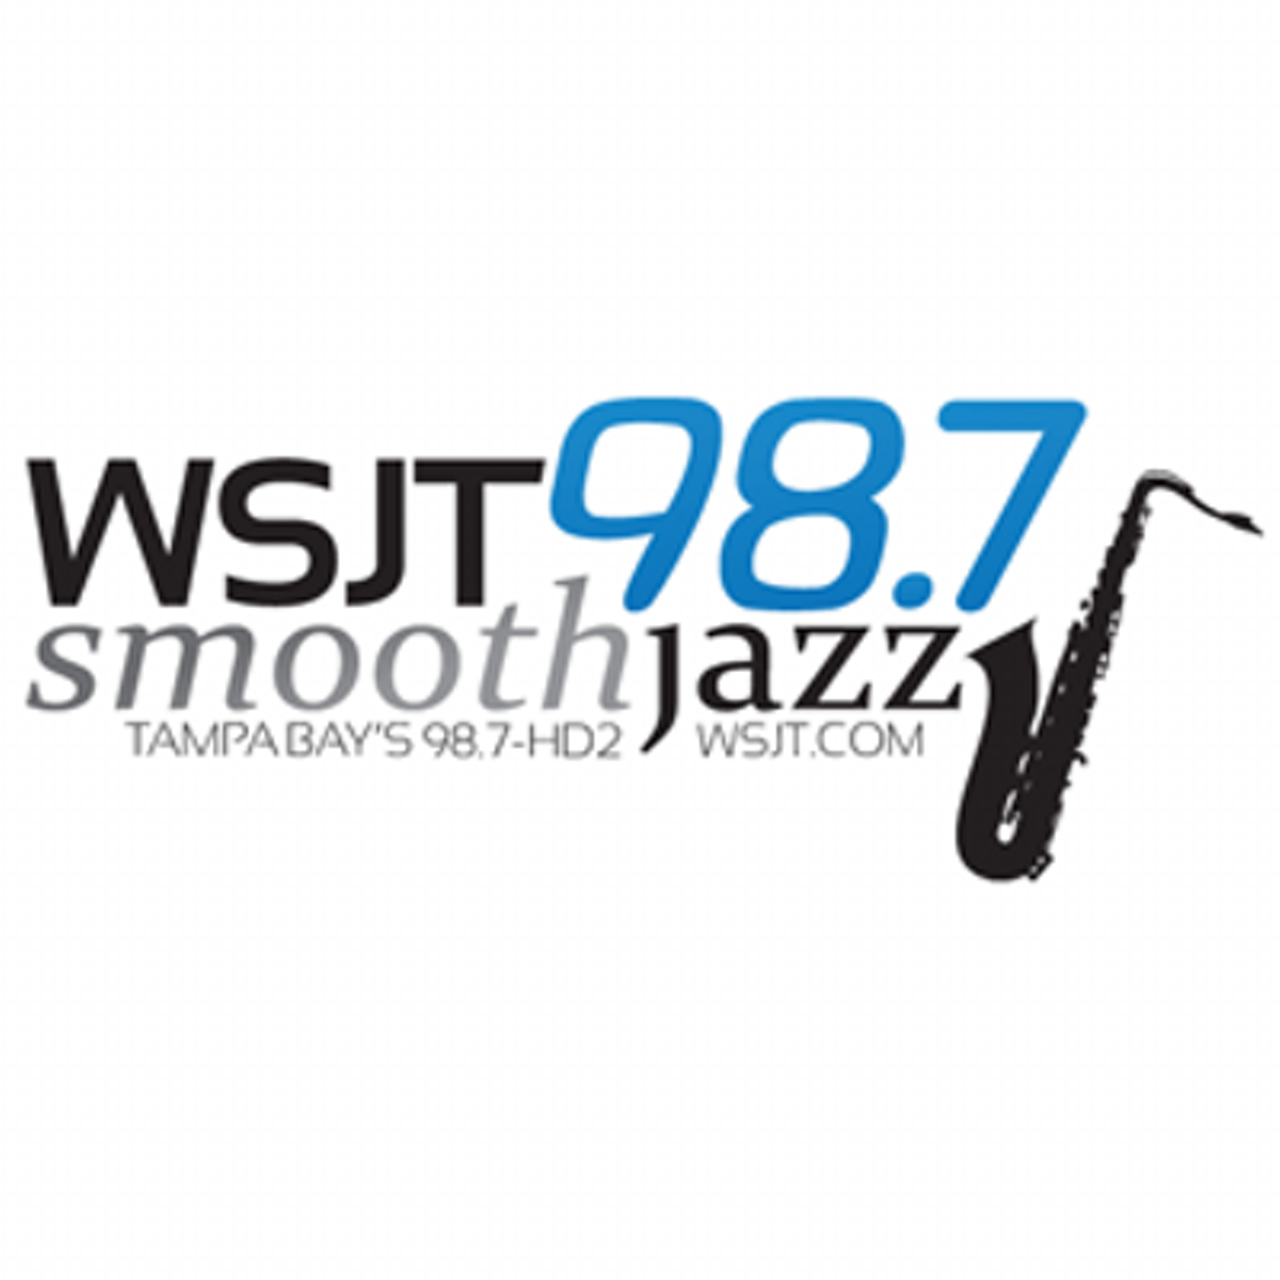 WSJT 94.1-FM Smooth Jazz
All lovers of jazz music remember the day when Tampa Bay’s Smooth Jazz radio station went offline. Now we have to go to Spotify or Apple Music to hear our favorite George Benson or Kenny G tracks.
Photo via WSJT Smooth Jazz/Twitter